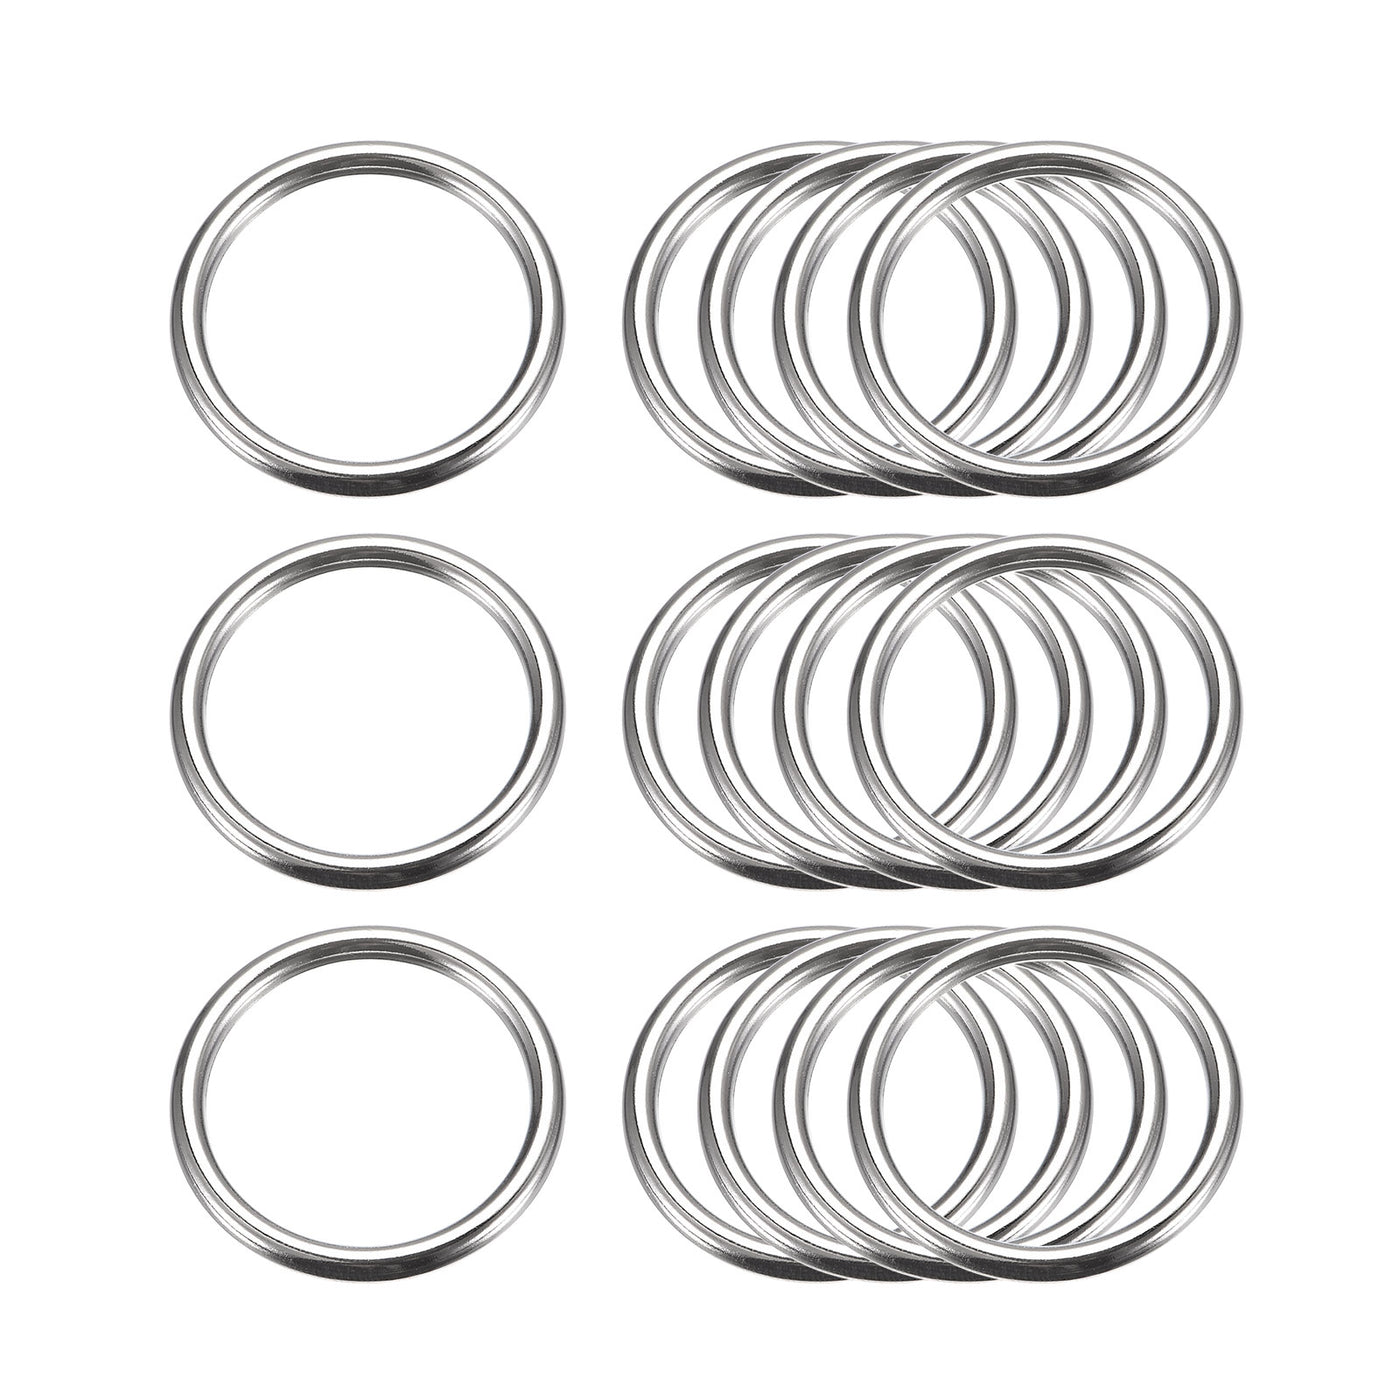 uxcell Uxcell Metal O Rings Multi-Purpose Welded O-Ring Buckle for Craft Belt Purse Bag Making Hardware